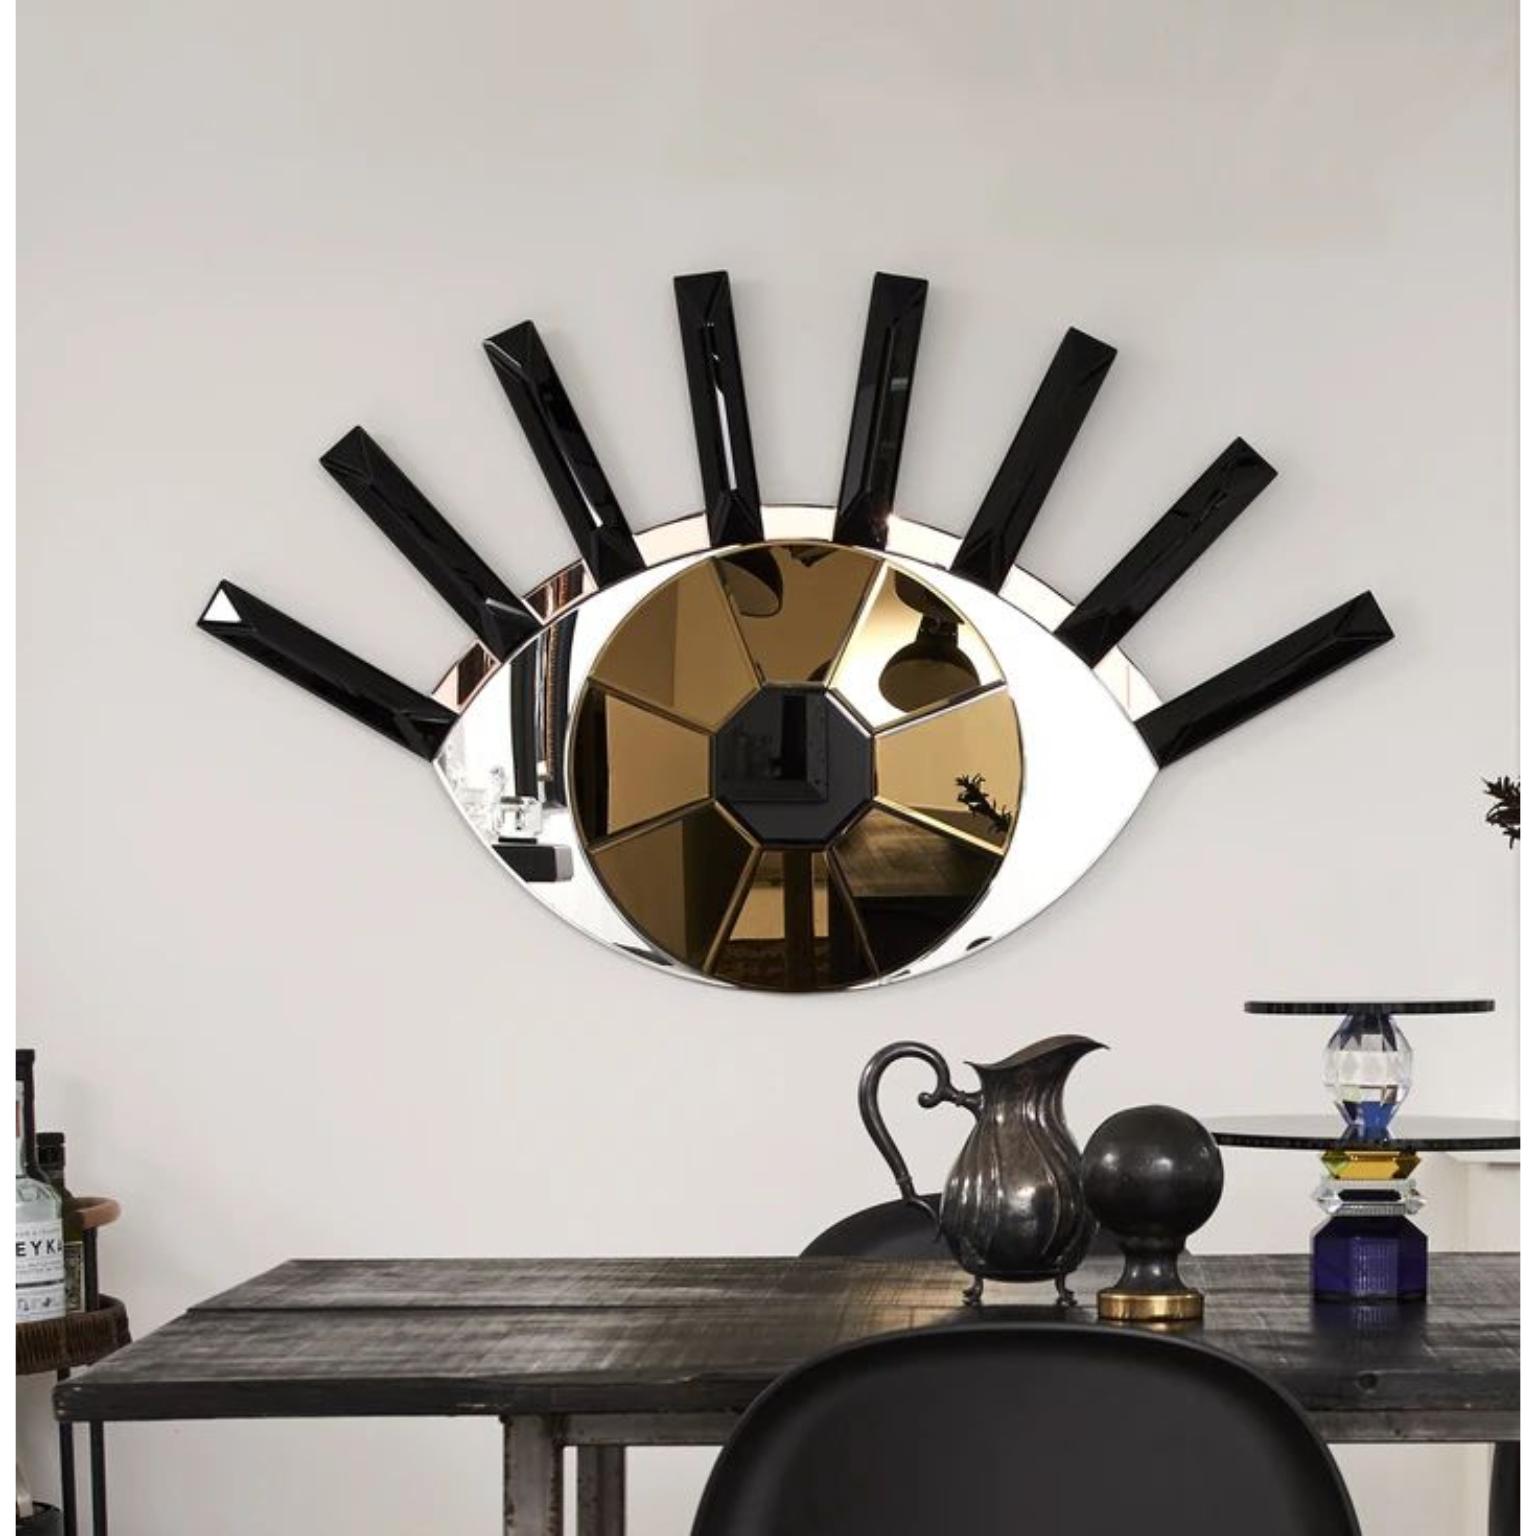 Eye of the Tiger mirror 
Dimensions: W 132.2 x D 3.5 x H 79.6 cm
Material: 4 mm faceted mirror on black painted MDF
Weight: 10 kg

The Reflections Copenhagen Eye of the Tiger mirror illustrates the magnificence of light as it bounces back and